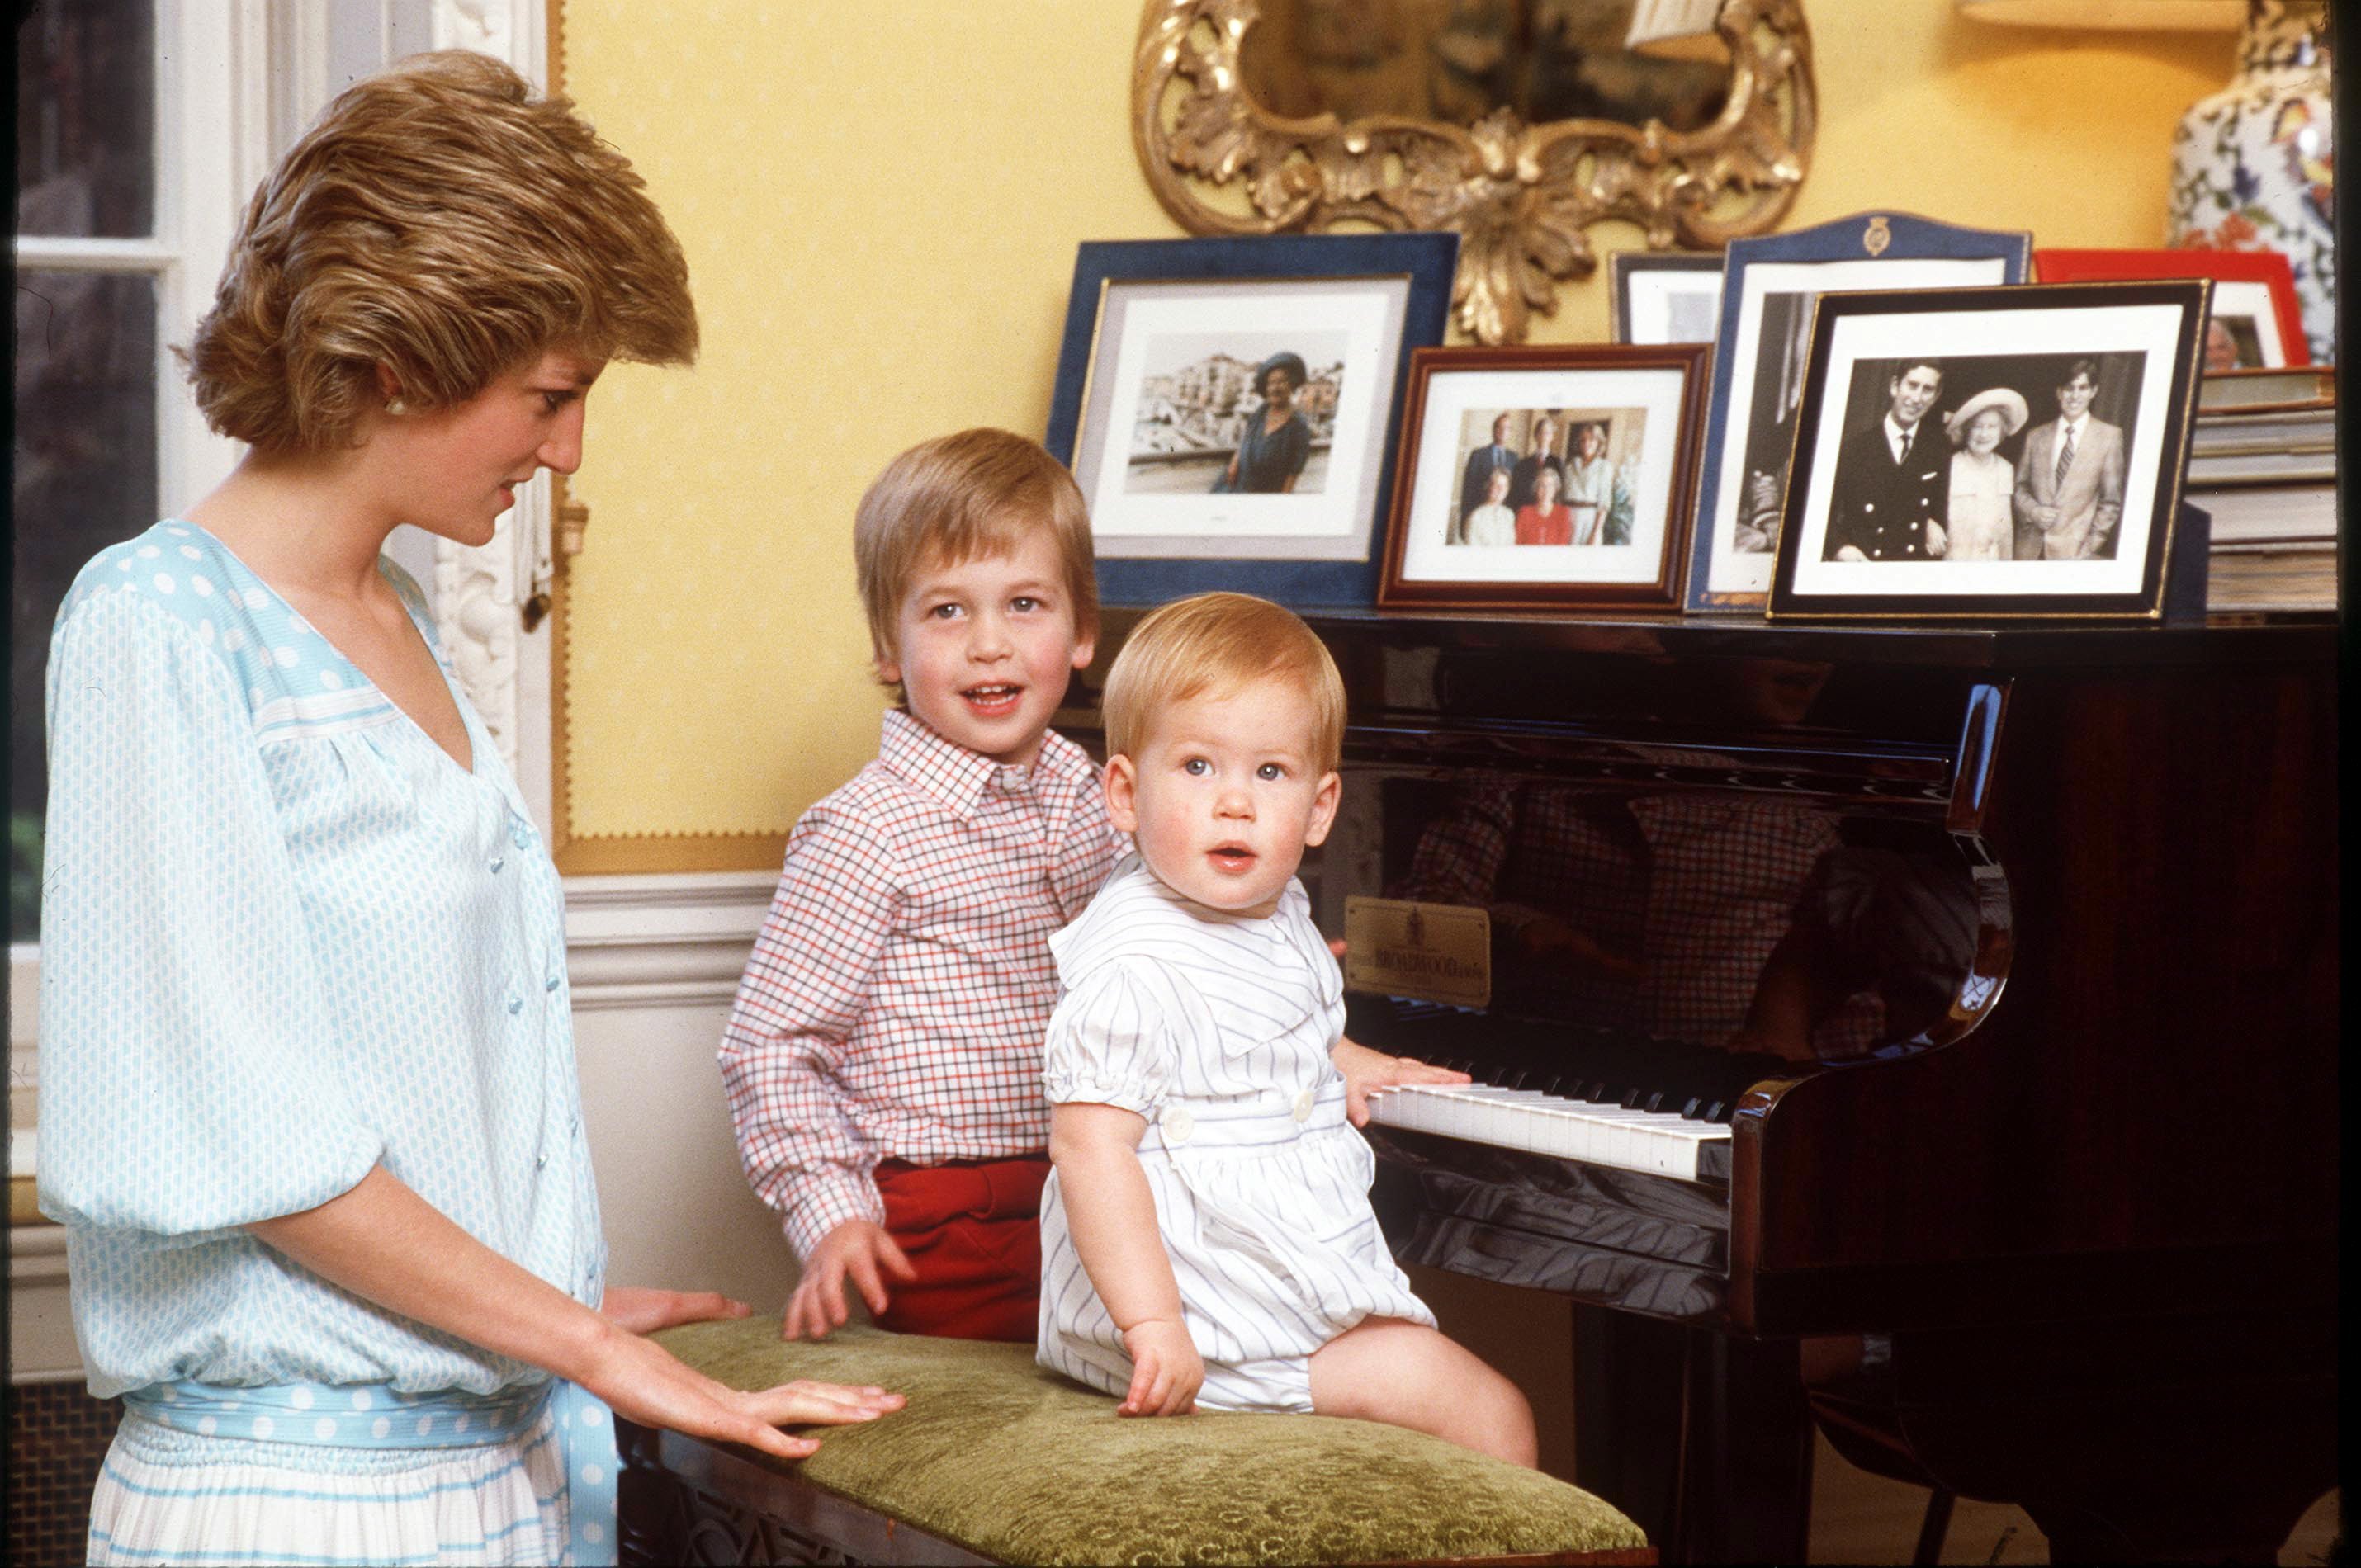  Princess Diana With Prince William And Prince Harry On The Piano At Home In Kensington Palace in 1985 | Source: Getty Images